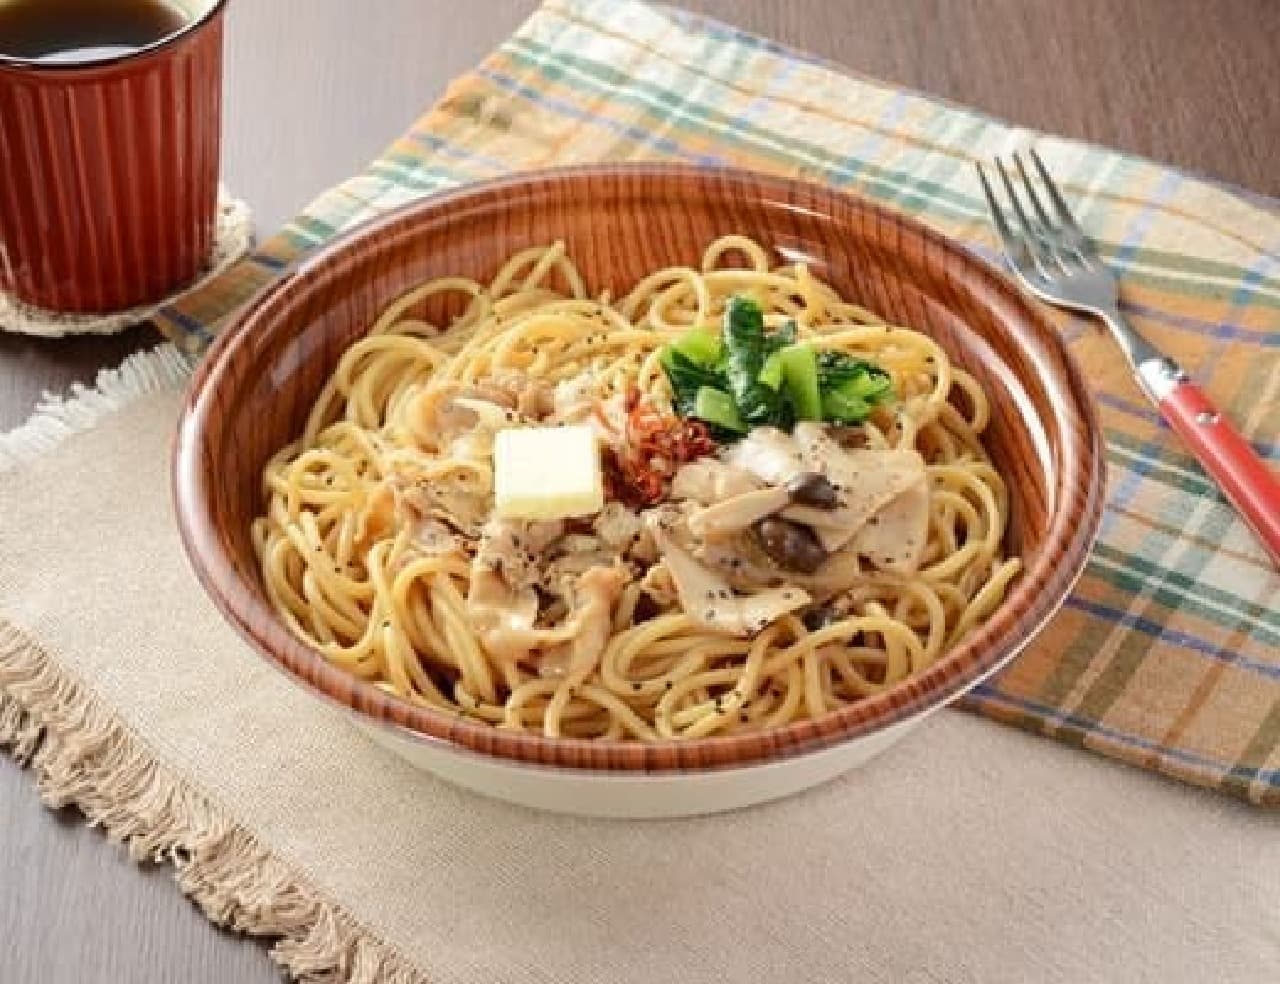 Lawson "Large Mushroom and Pork Butter Soy Sauce Pasta"